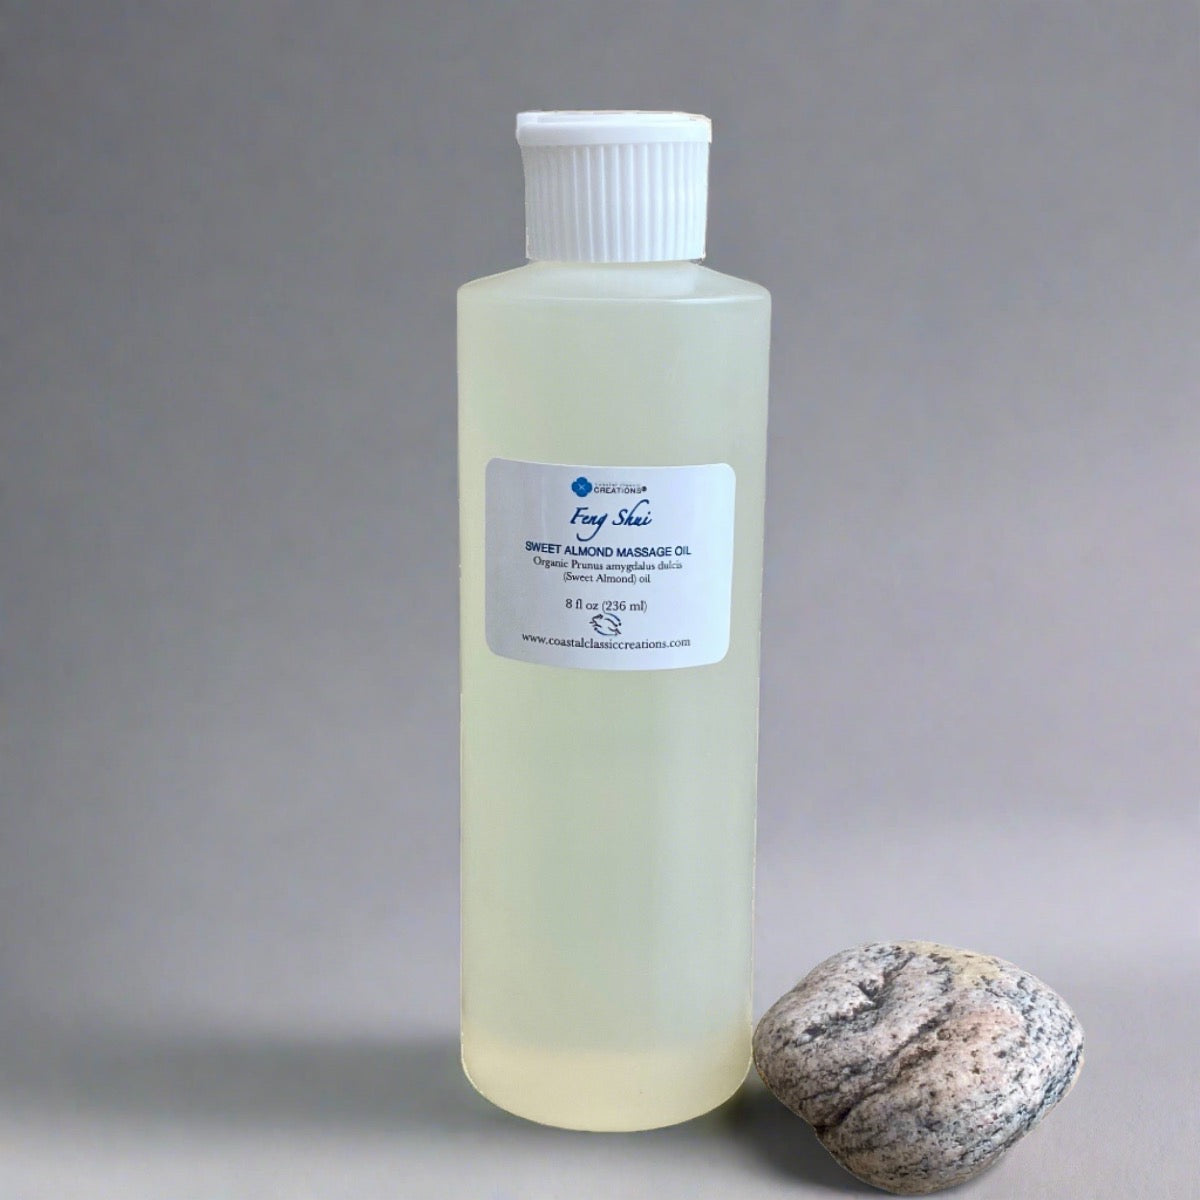 8 oz bottle of sweet almond oil with a white flip cap labeled with the product name and ingredients, featuring a sleek, cylindrical shape